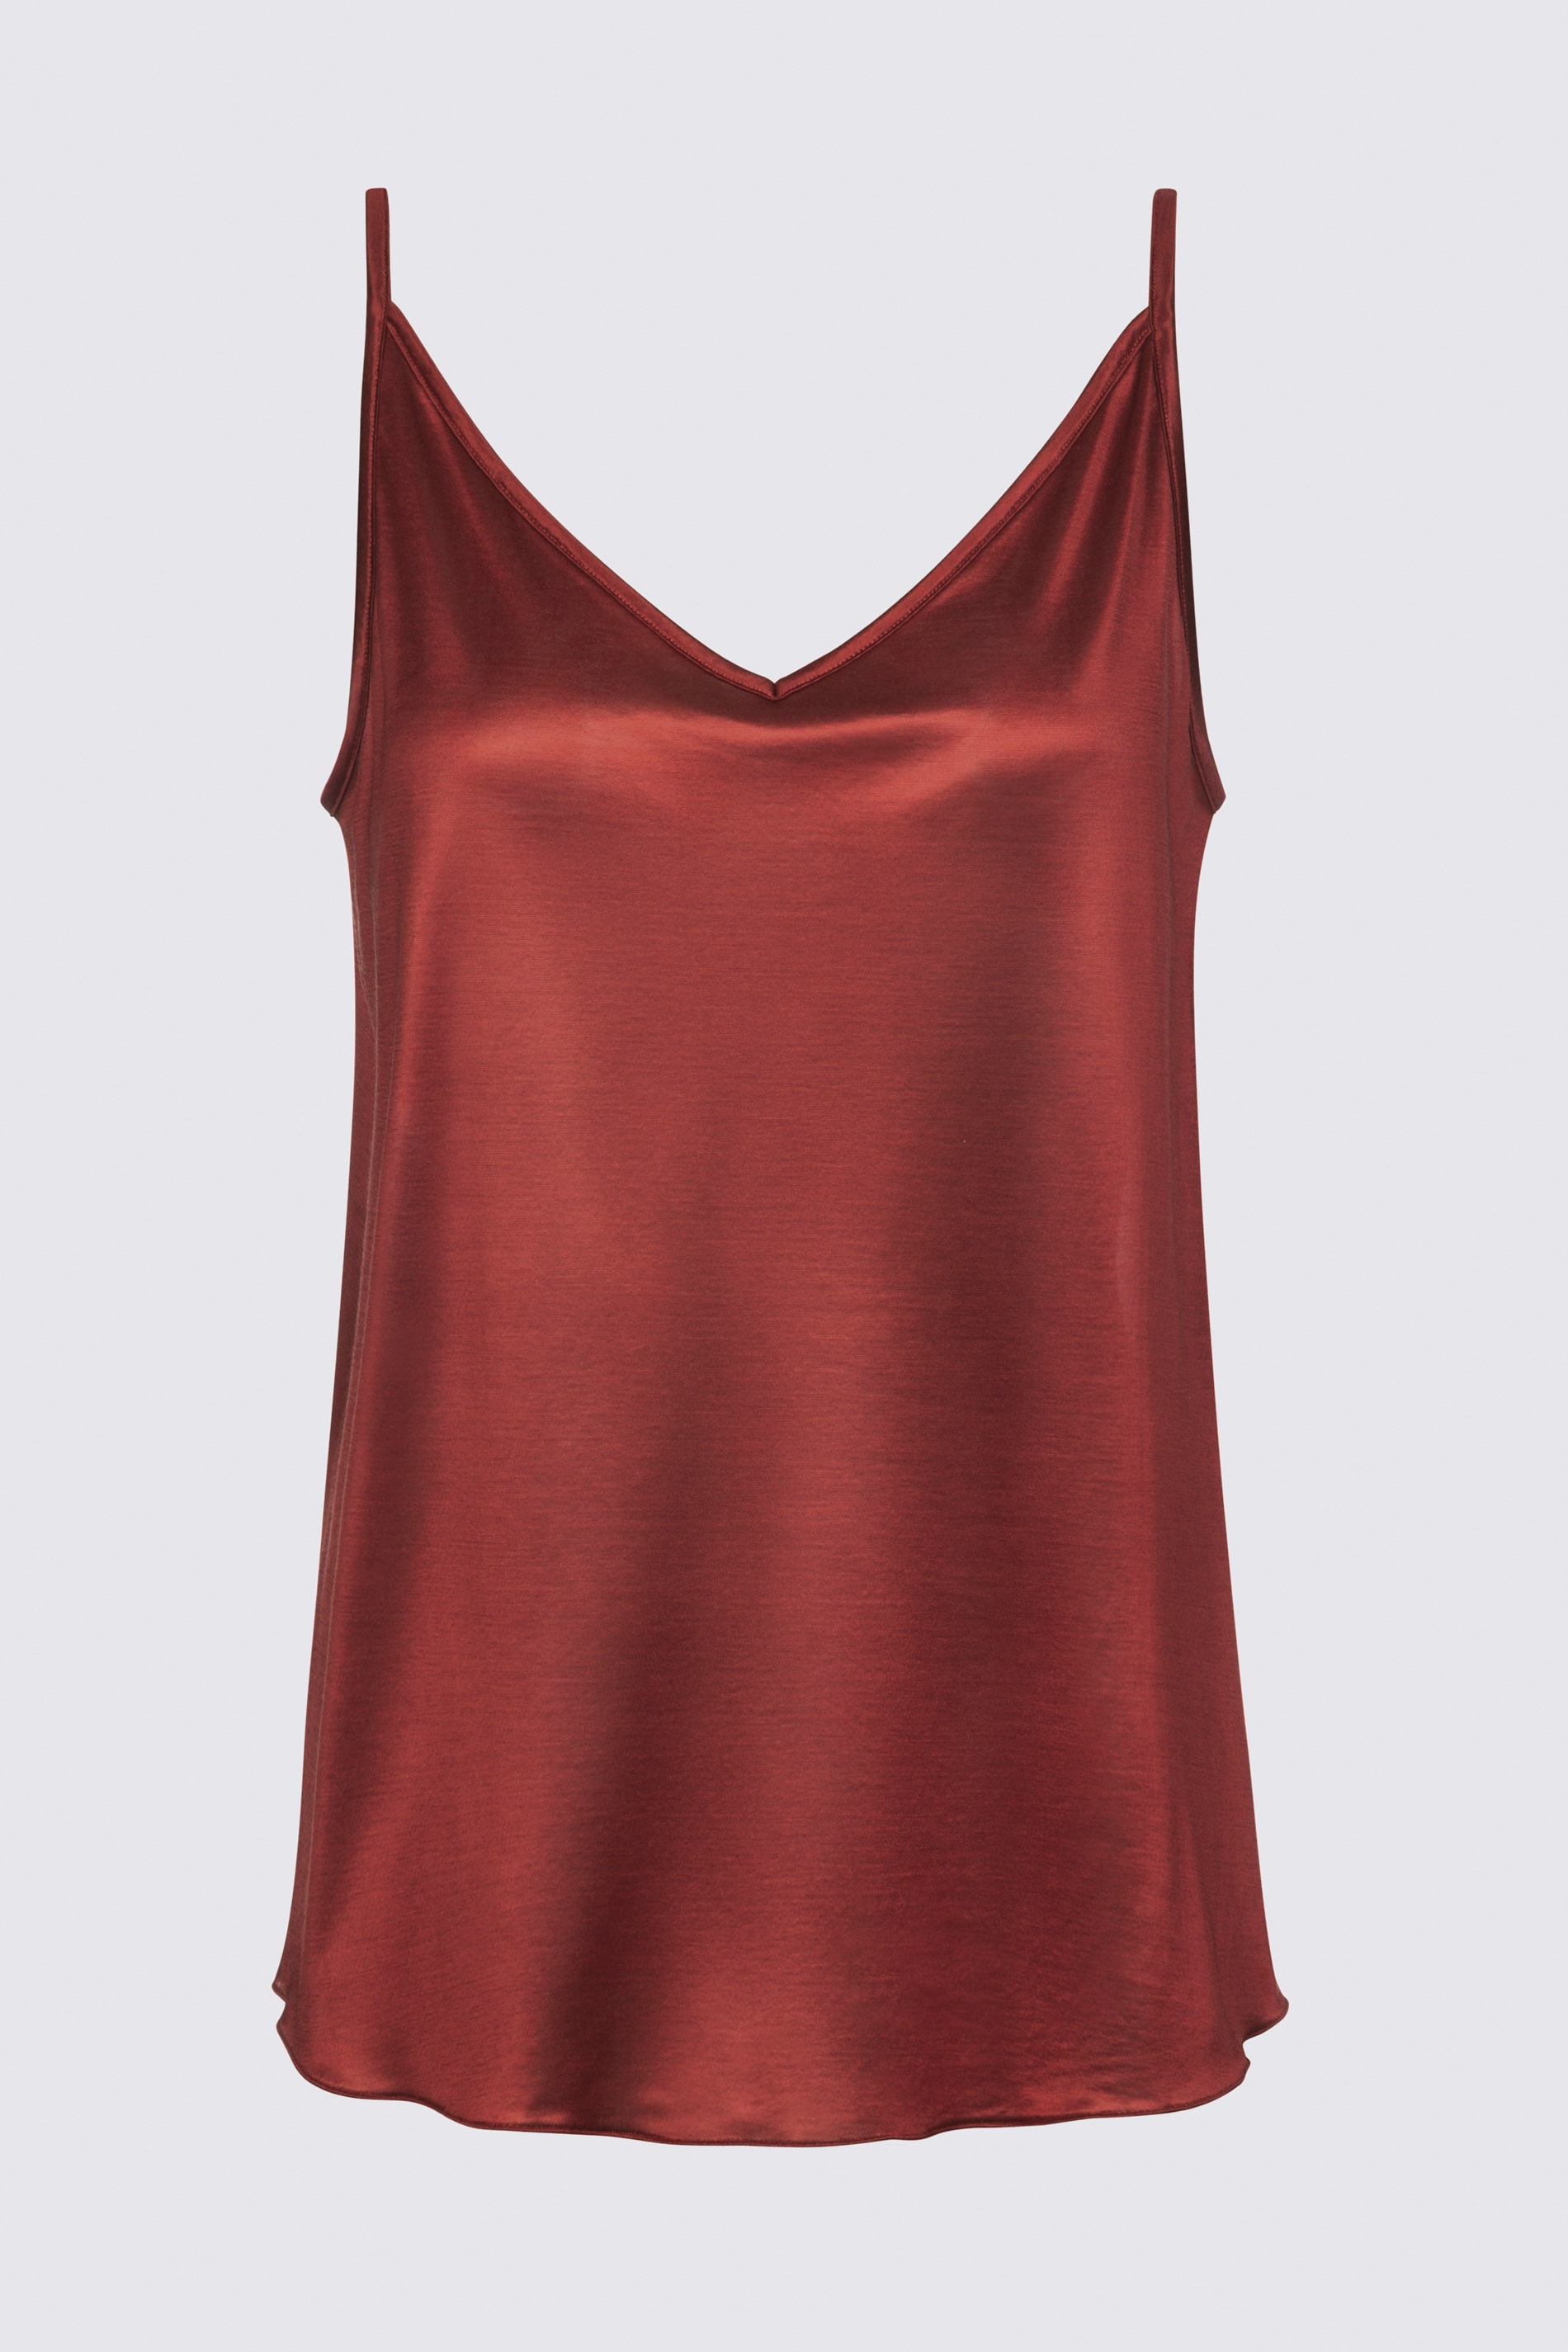 Camisole Red Pepper Serie Coco Uitknippen | mey®